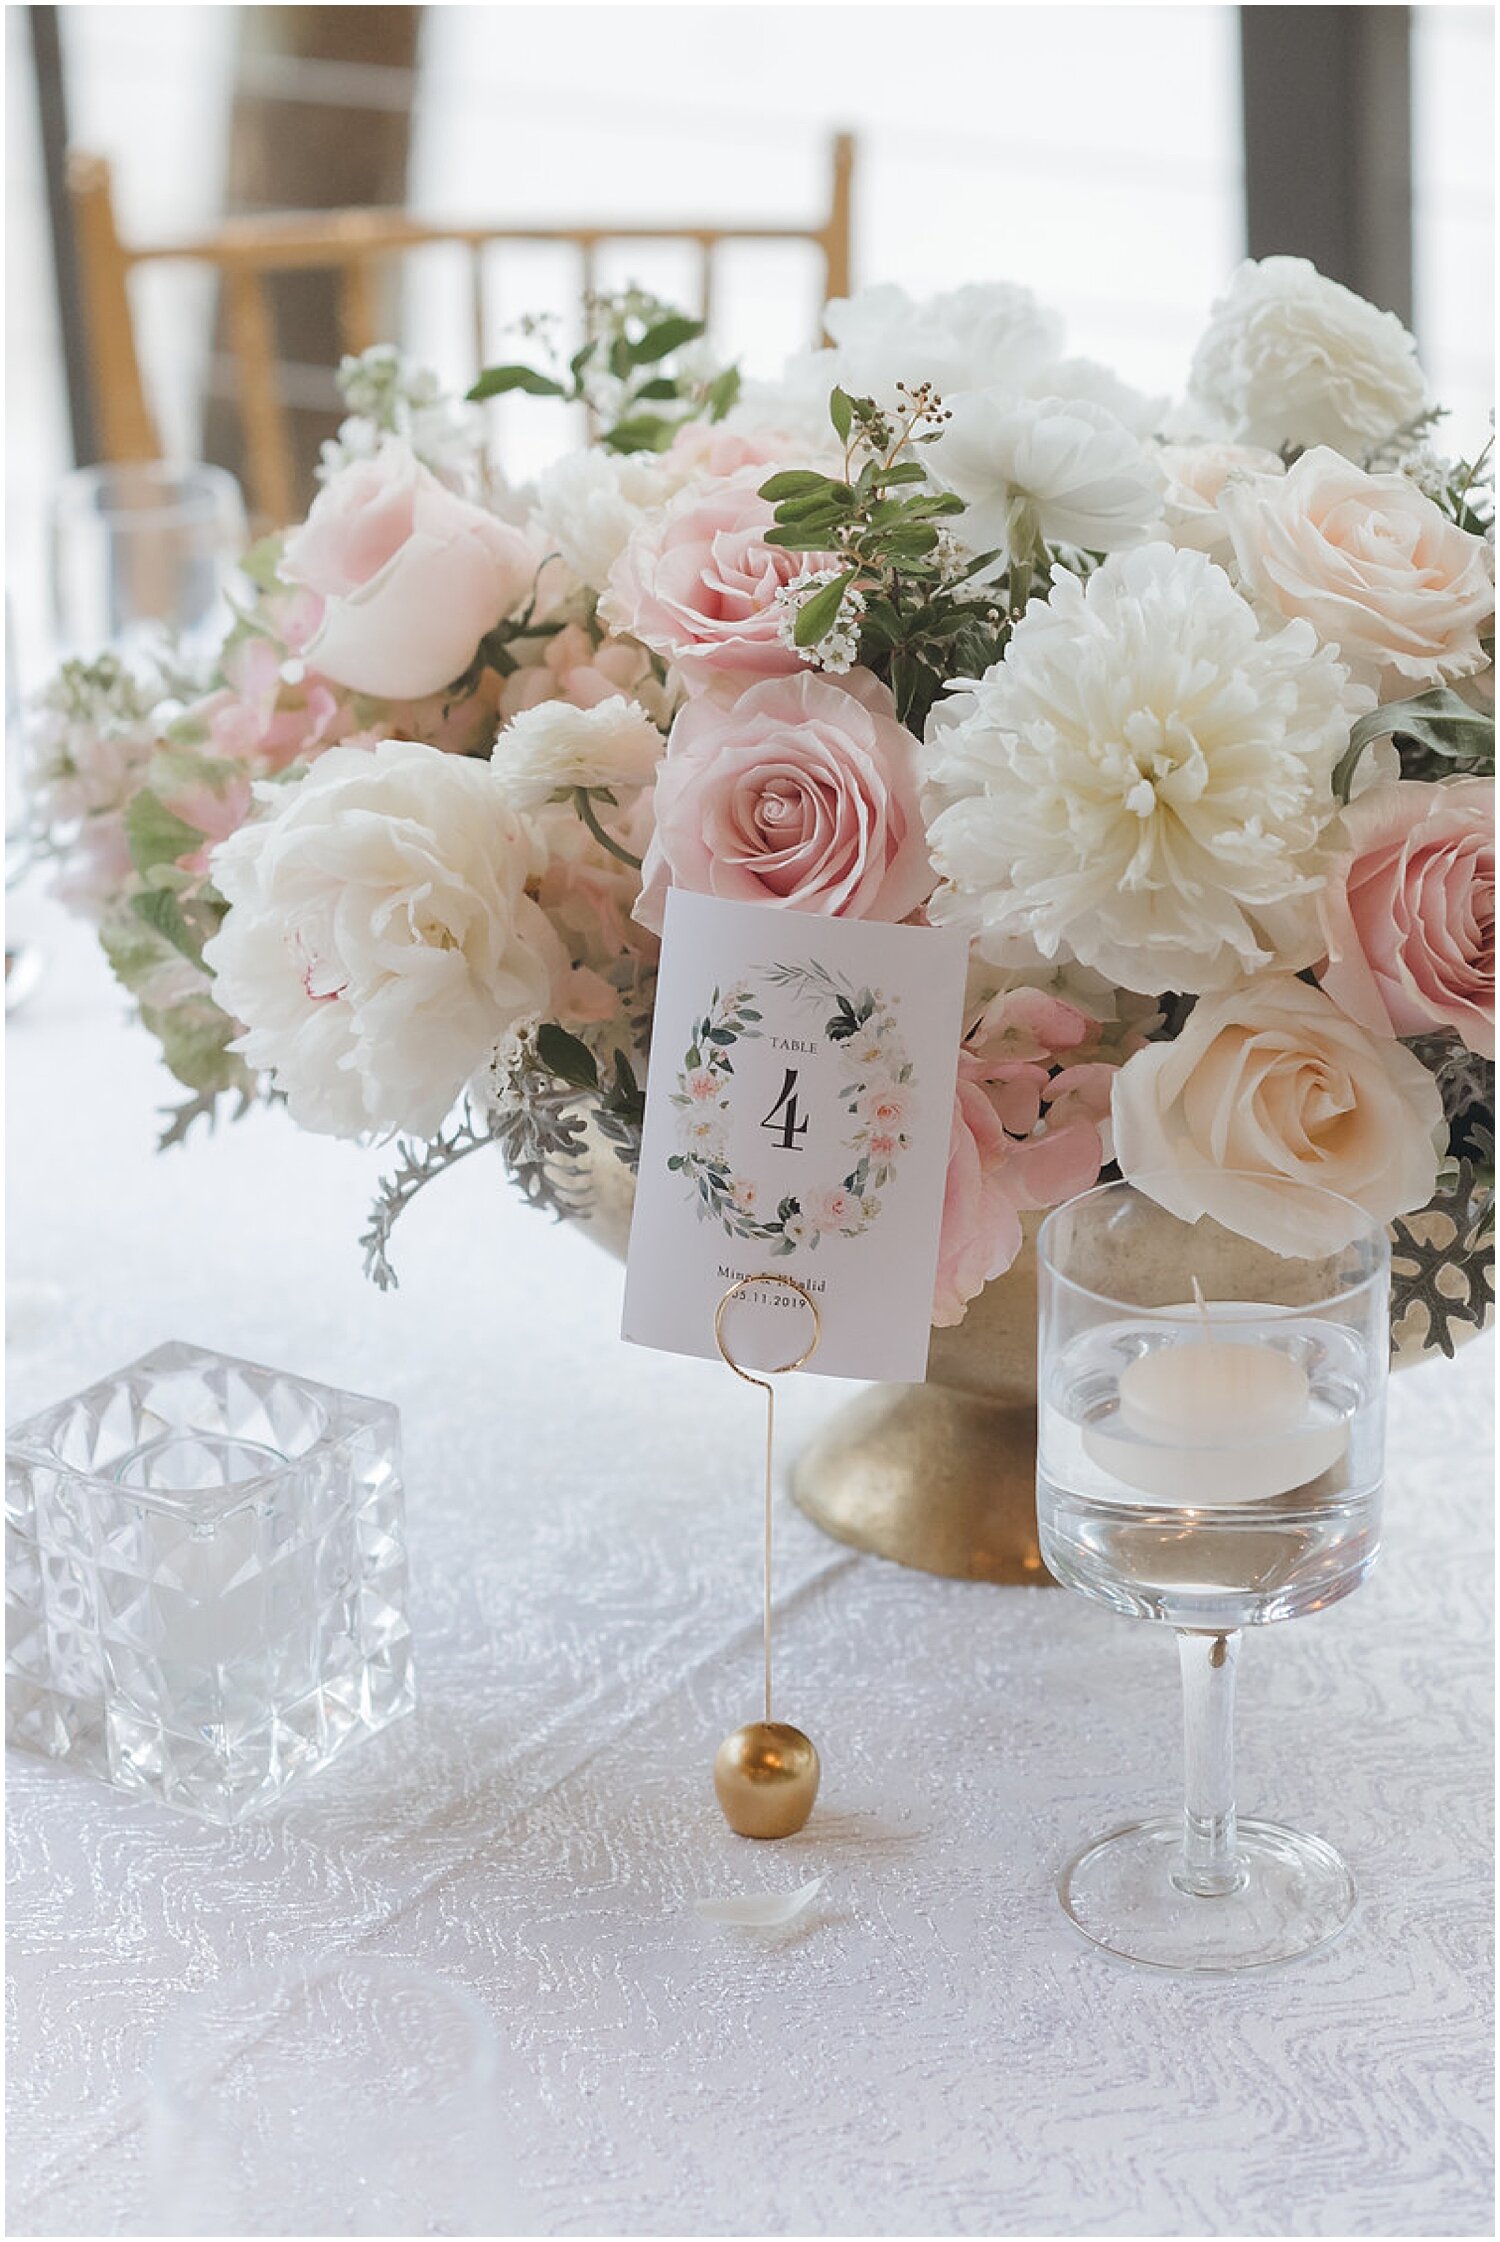  Peach and white floral centerpiece  